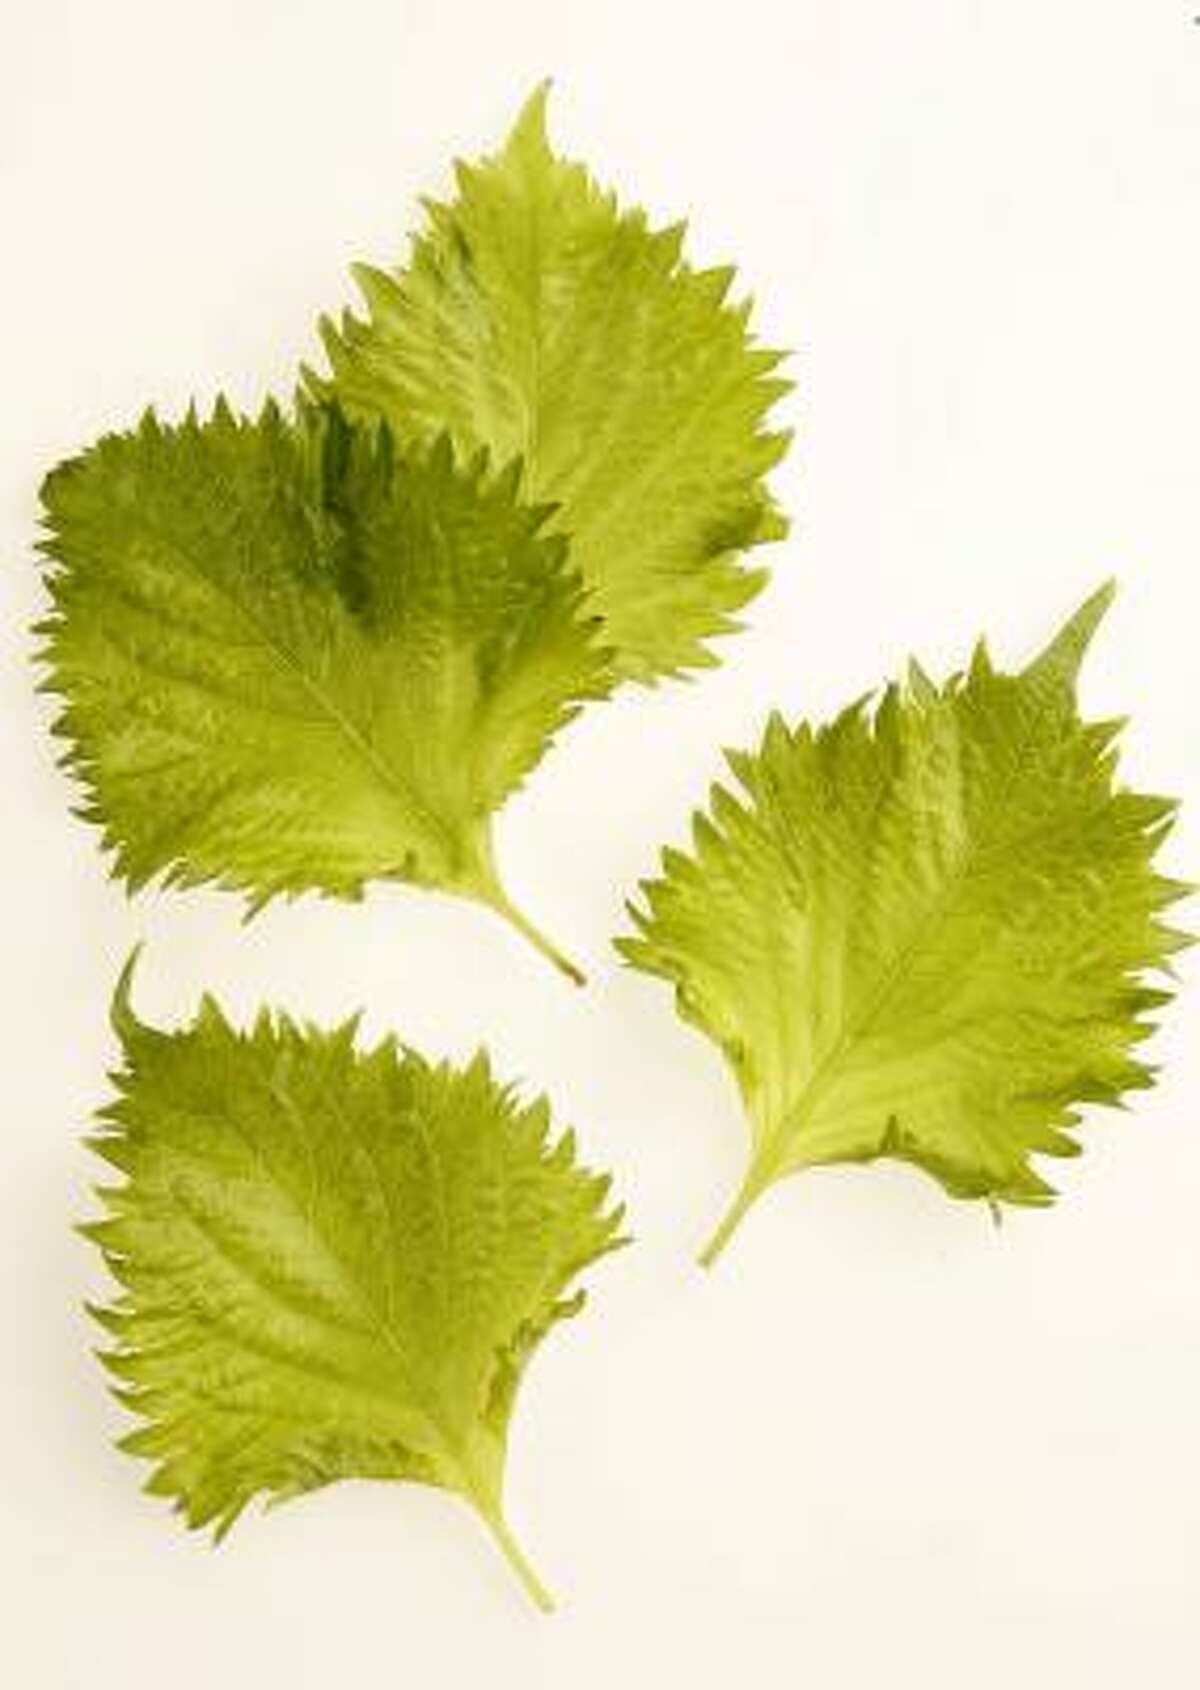 SPICY GREEN: Shiso, a member of the mint family, tastes of cumin and cinnamon.